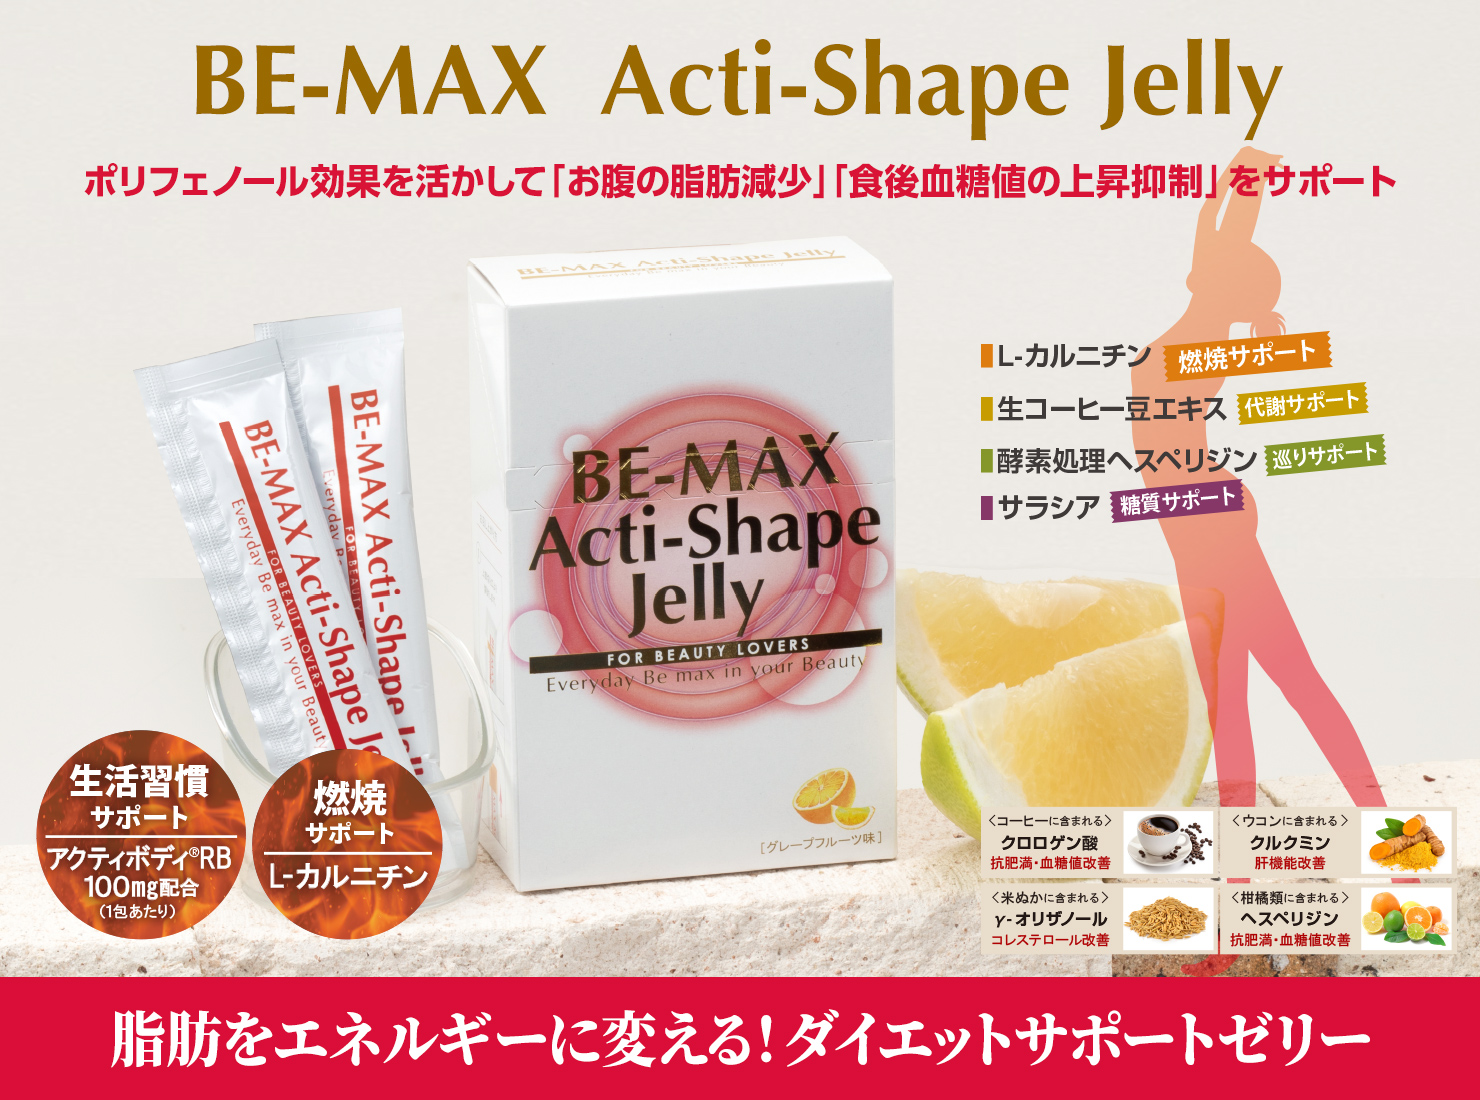 BE-MAX Acti-Shape Jelly